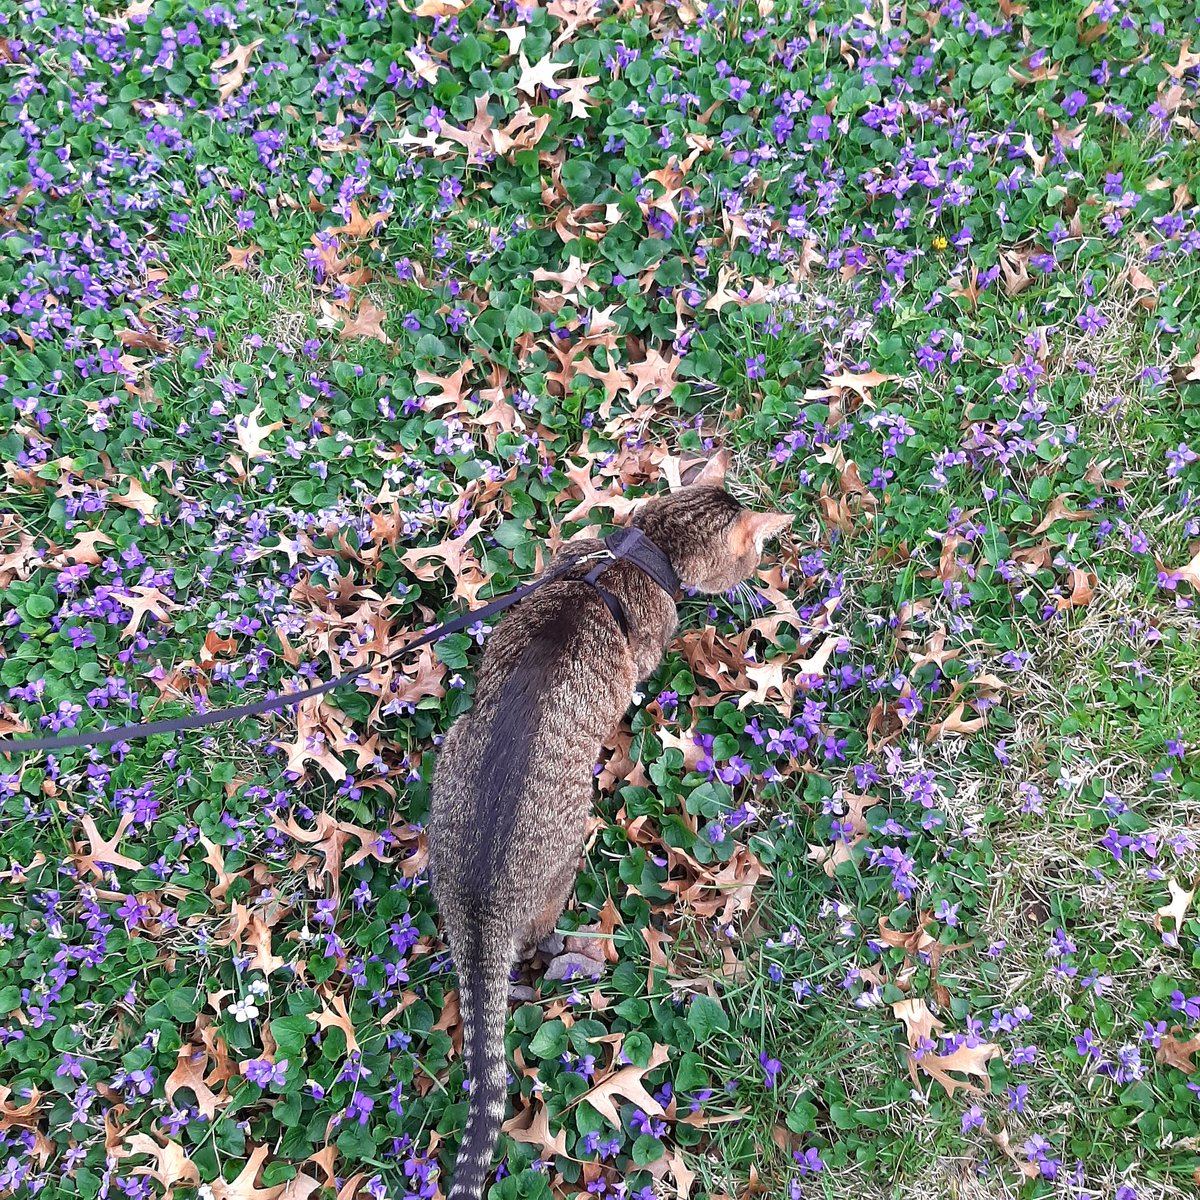 We took my buddy's cat for a walk through the violets 💕